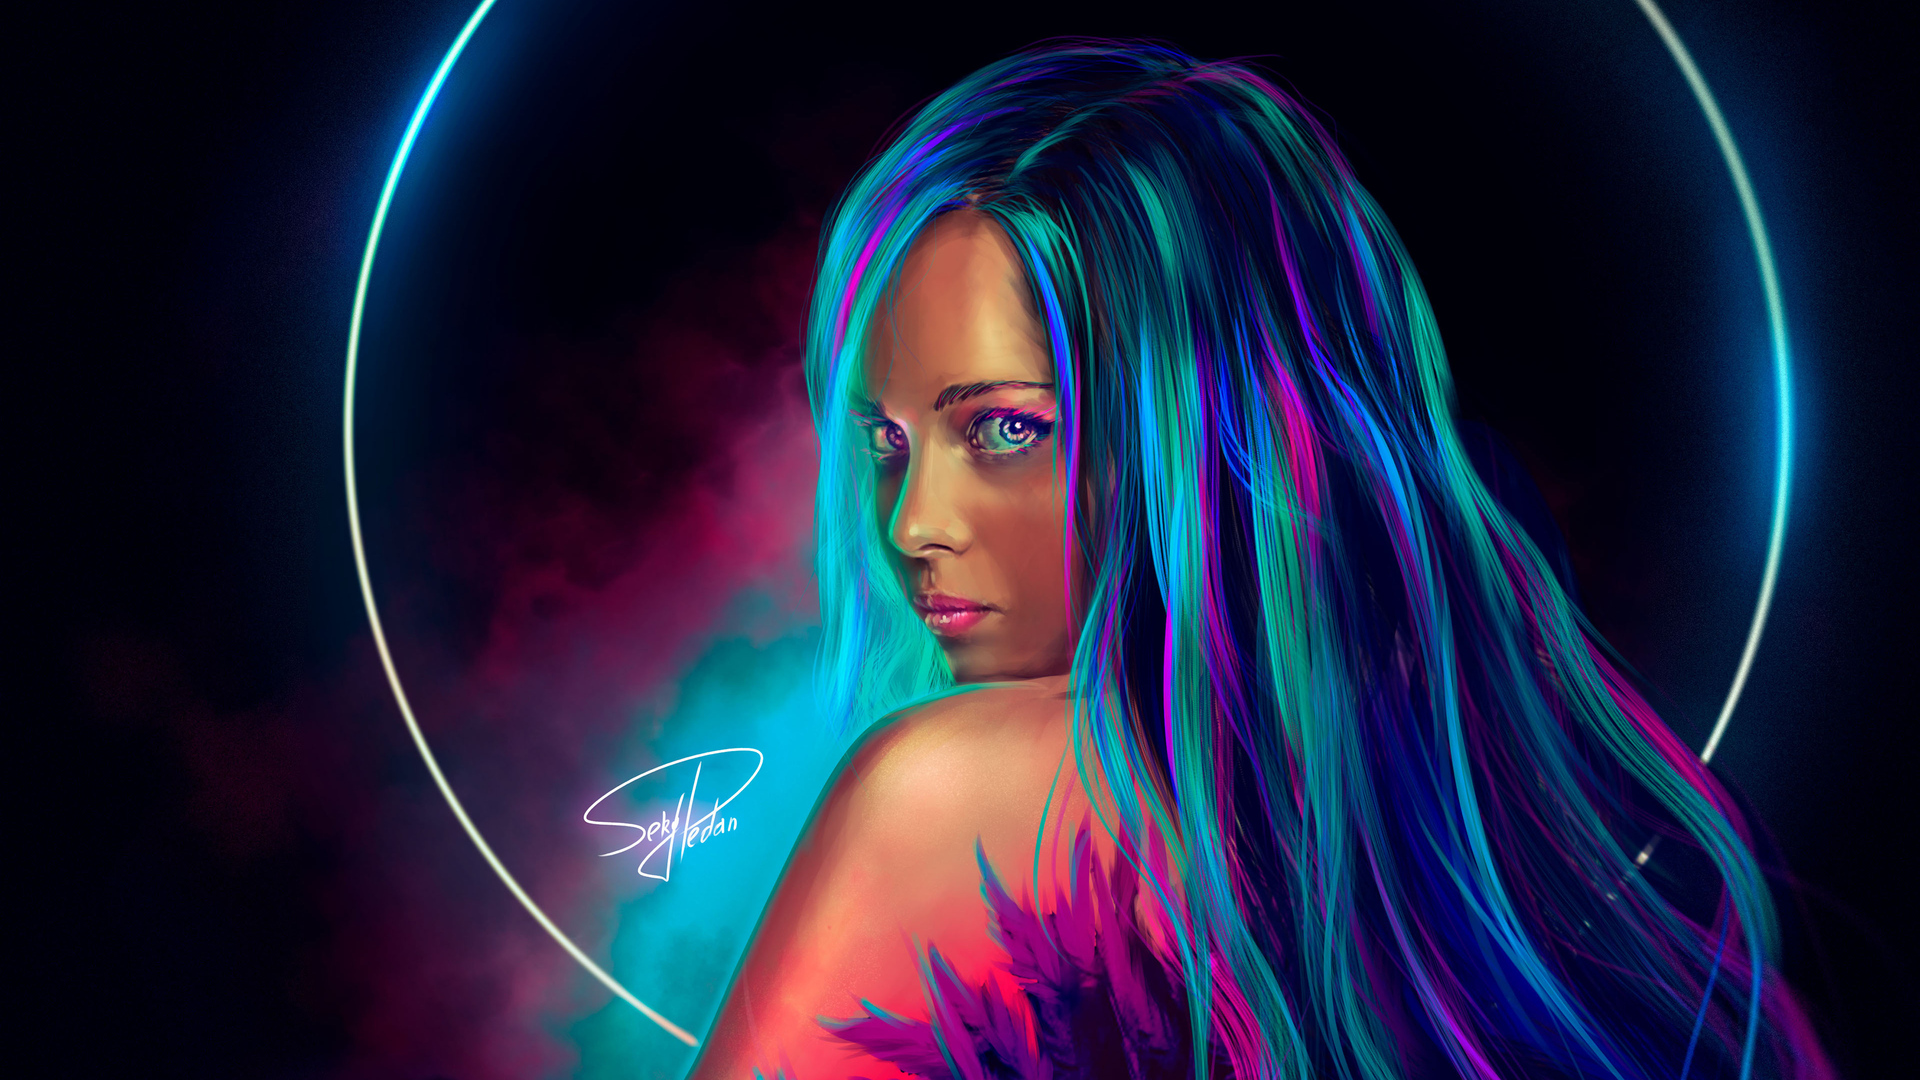 Neon Girl Digital Art Laptop Full HD 1080P HD 4k Wallpaper, Image, Background, Photo and Picture